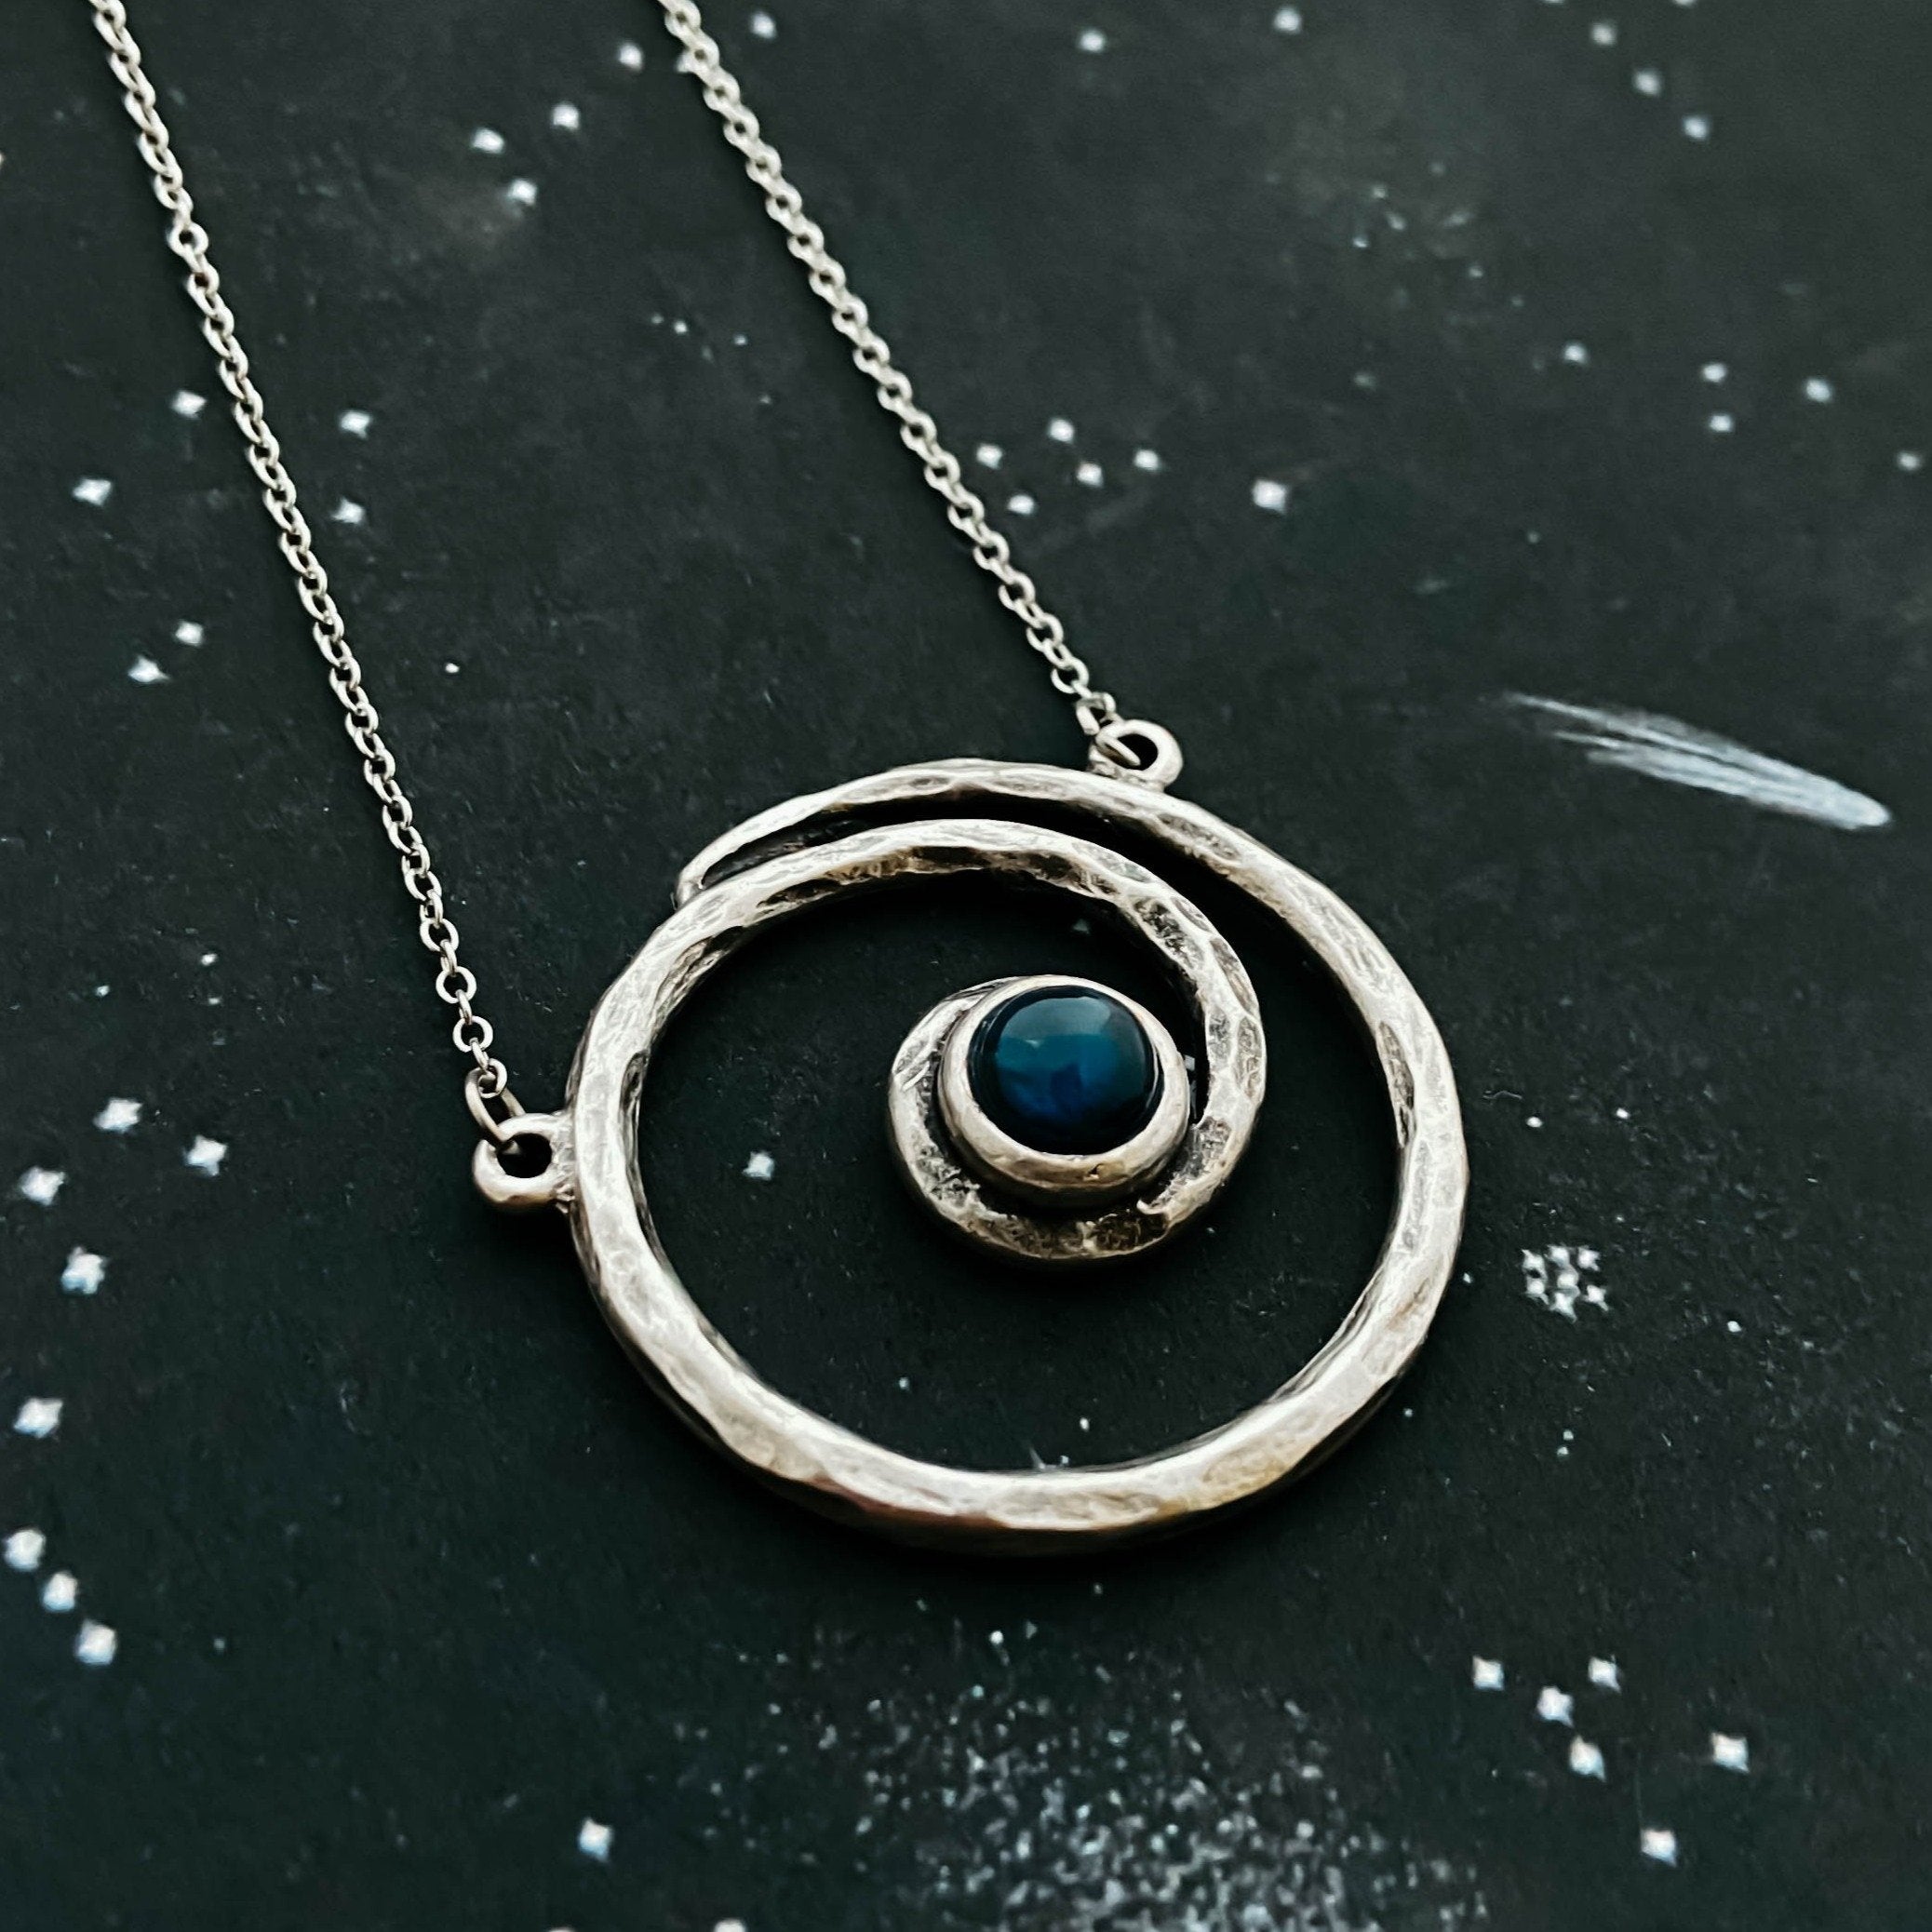 Spiral Silver Milky Way Jewelry Set with Blue Labradorite Stones - Necklace and Earrings - Jewelry & Watches - Bijou Her -  -  - 